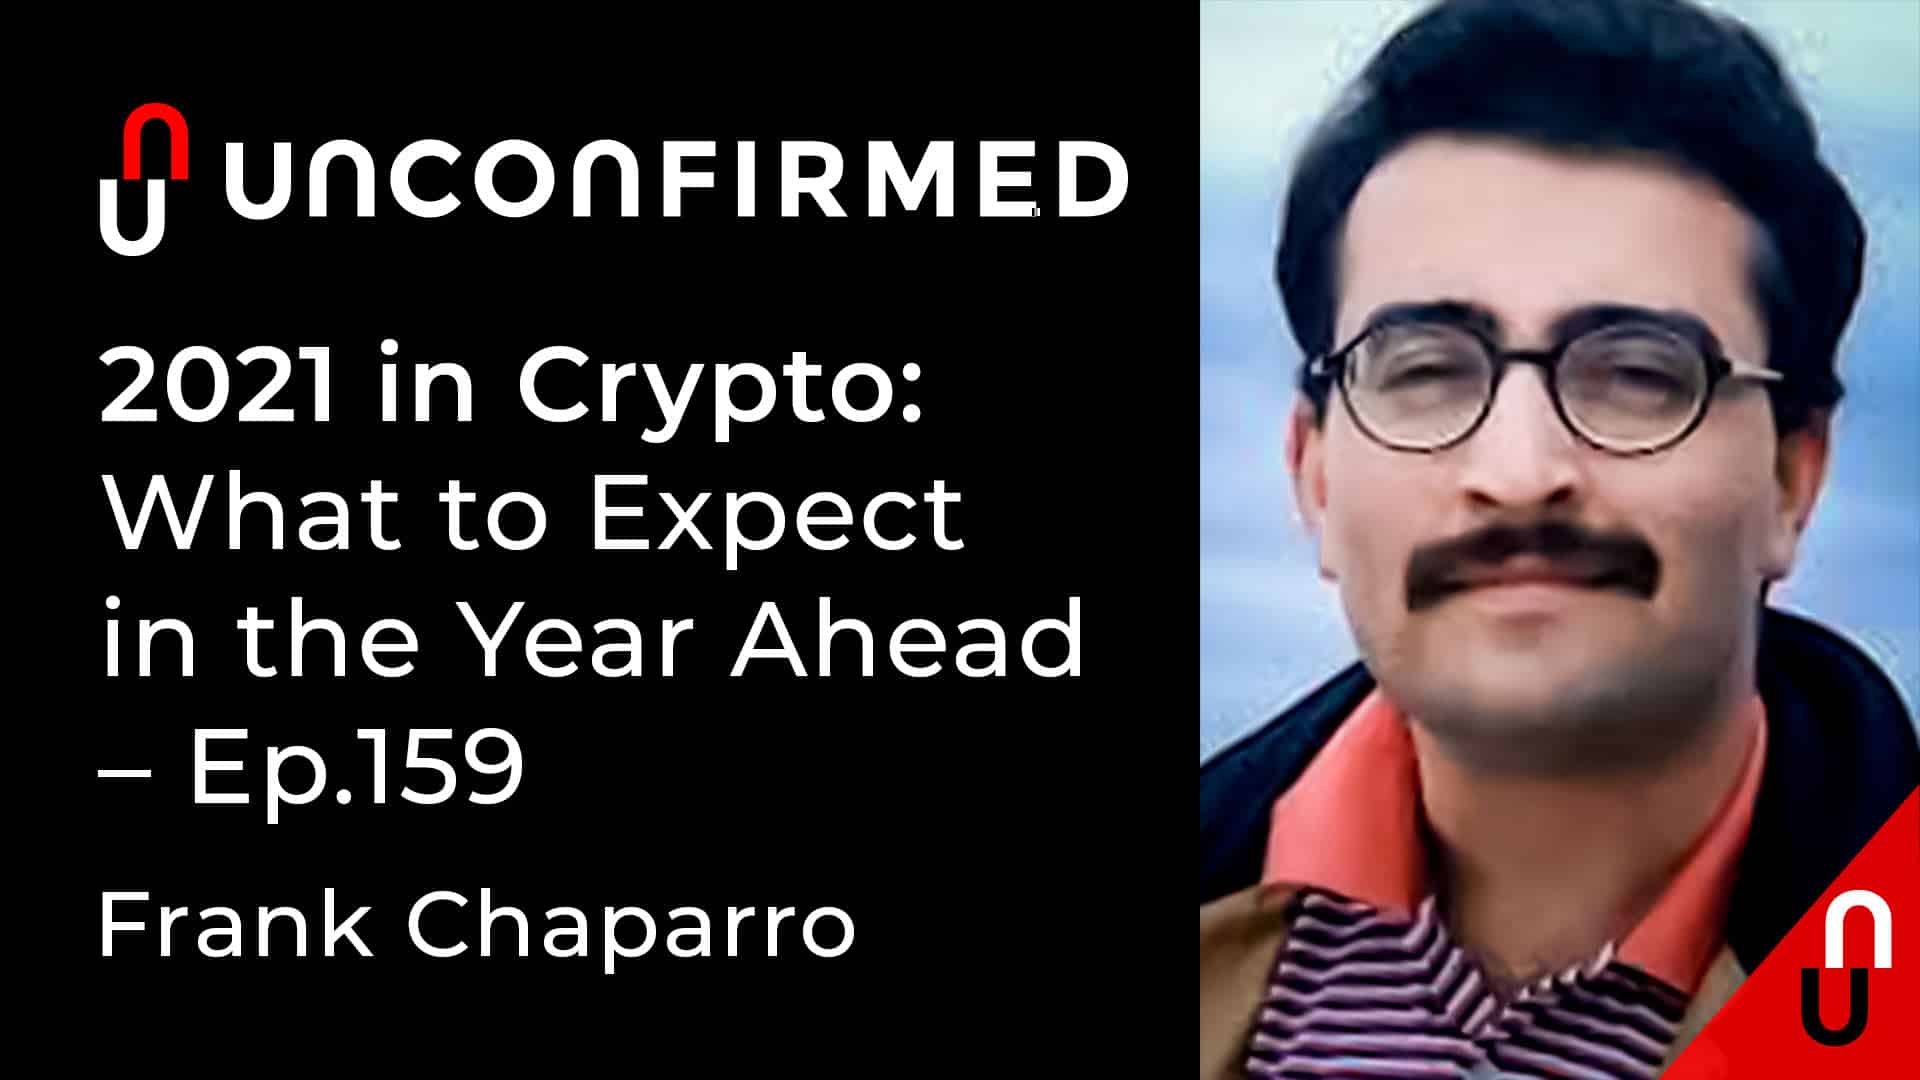 Unconfirmed - Ep.159 - 2021 in Crypto - What to Expect in the Year Ahead